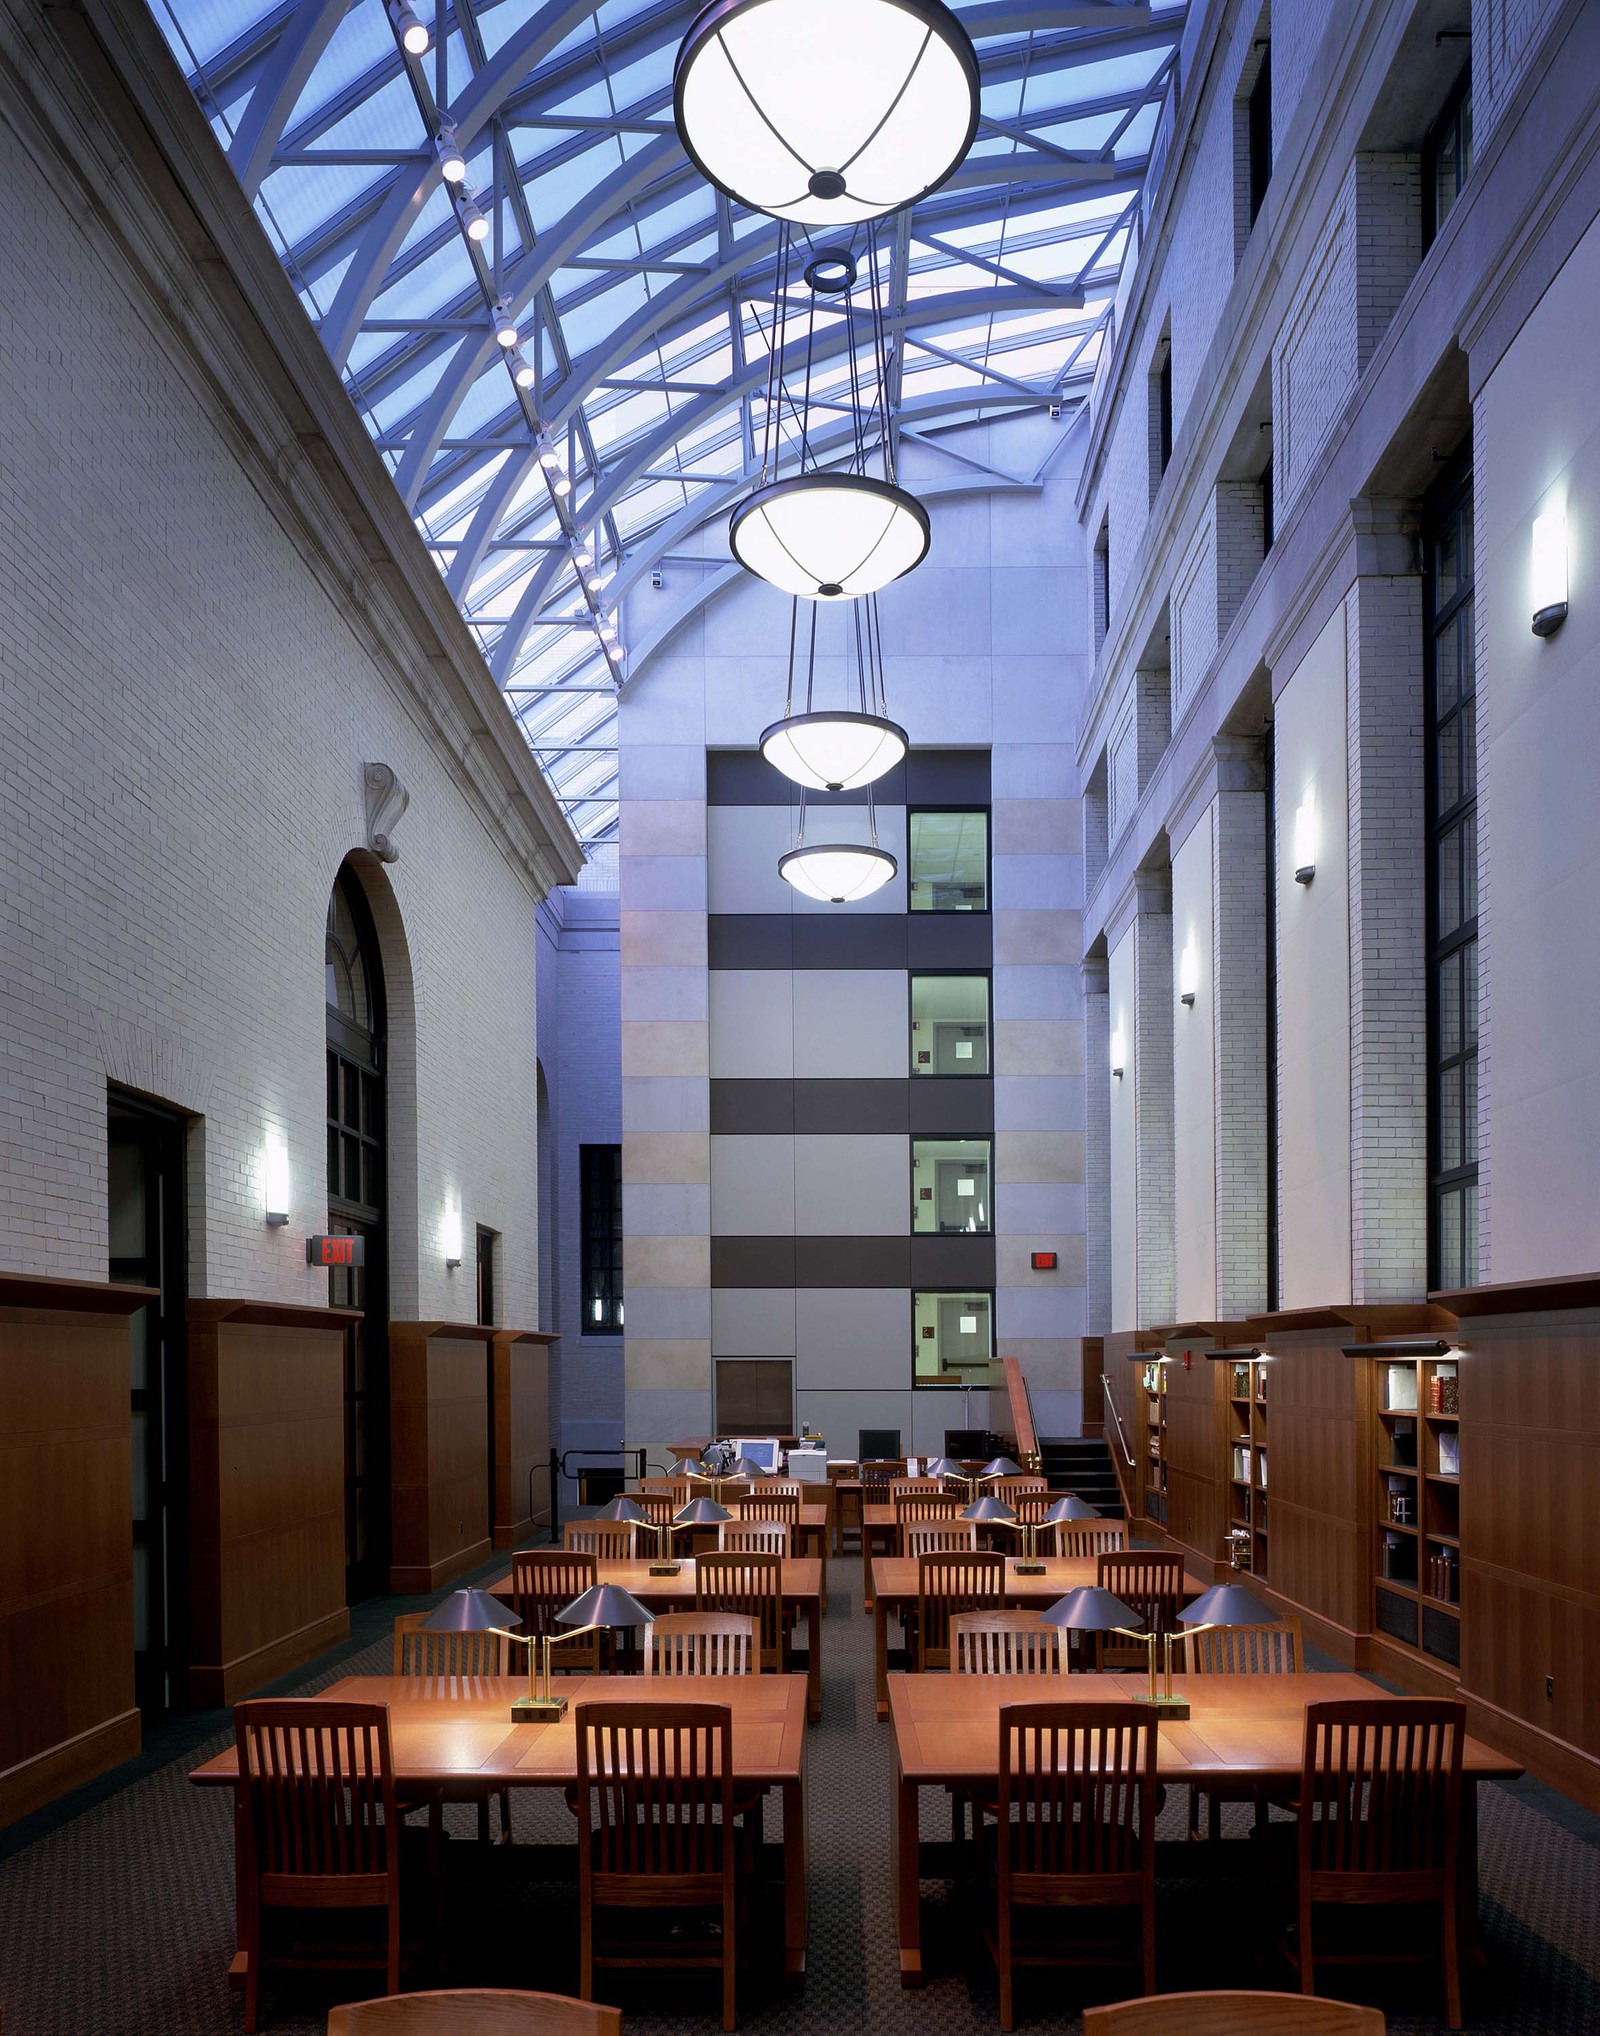 Another view of the high ceilings in the entryway. This space work so effectively. There is the grand atrium paired with the warm wood wall and furniture. The architects did an excellent job making this job timeless and so fitting for the Harvard community.